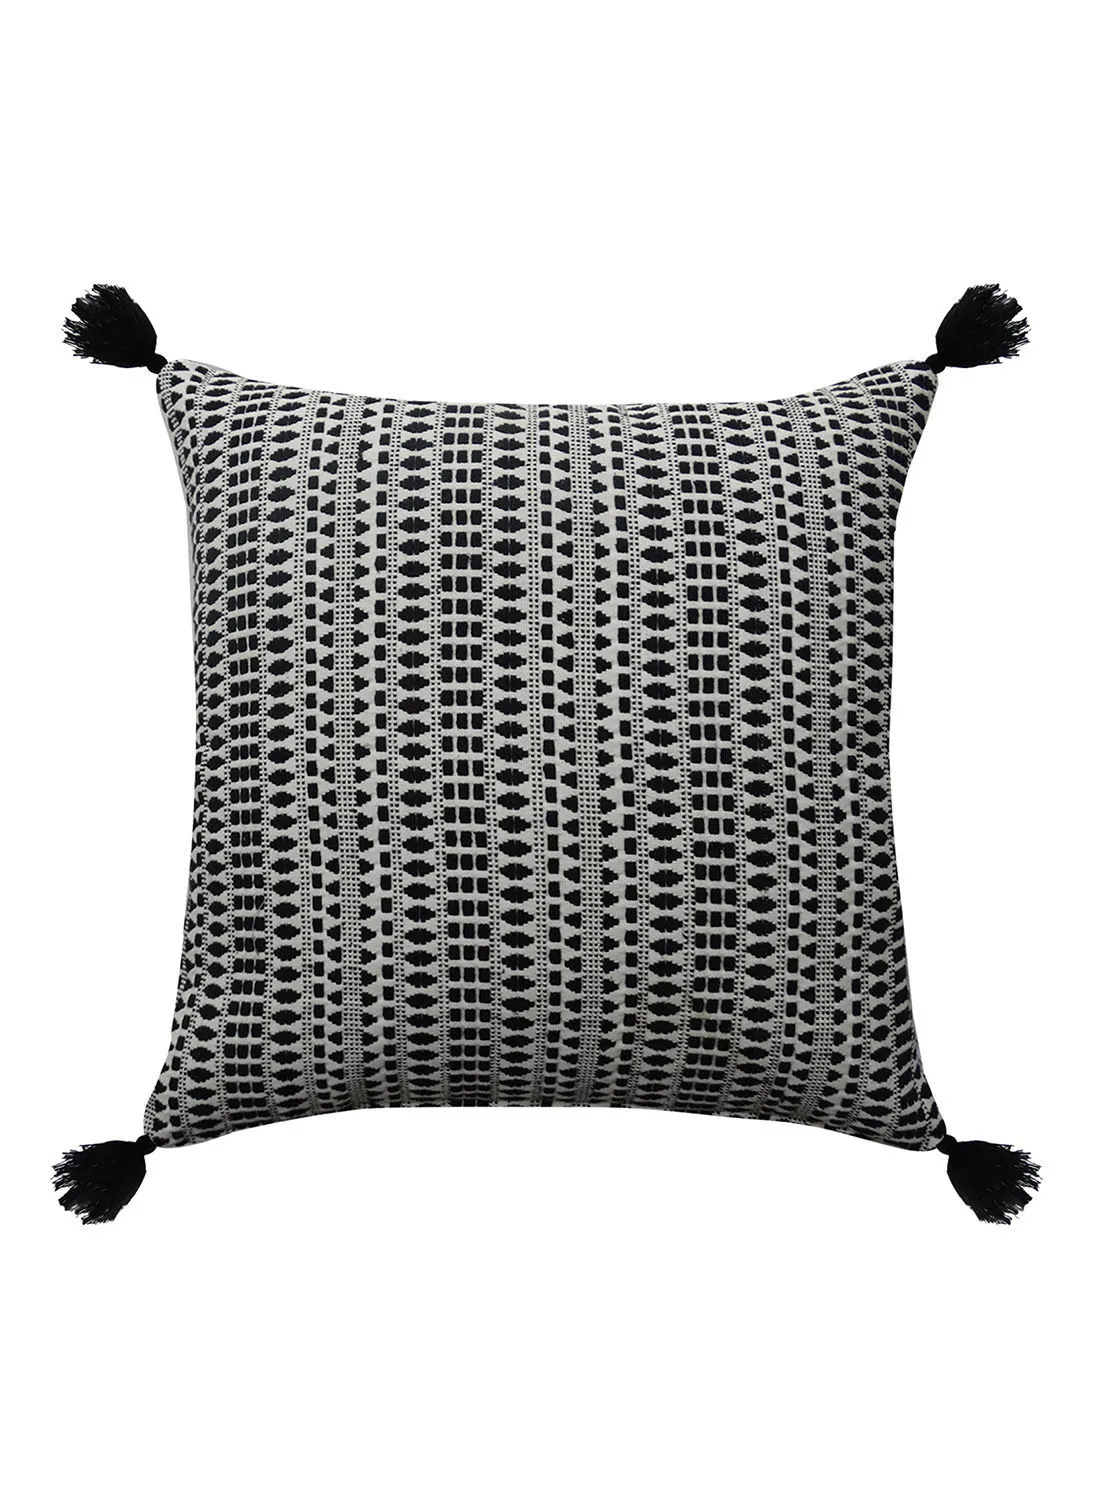 noon east Decorative Pillow , Size Black/White - Polyester Jacquard Bedroom Or Living Room Decoration